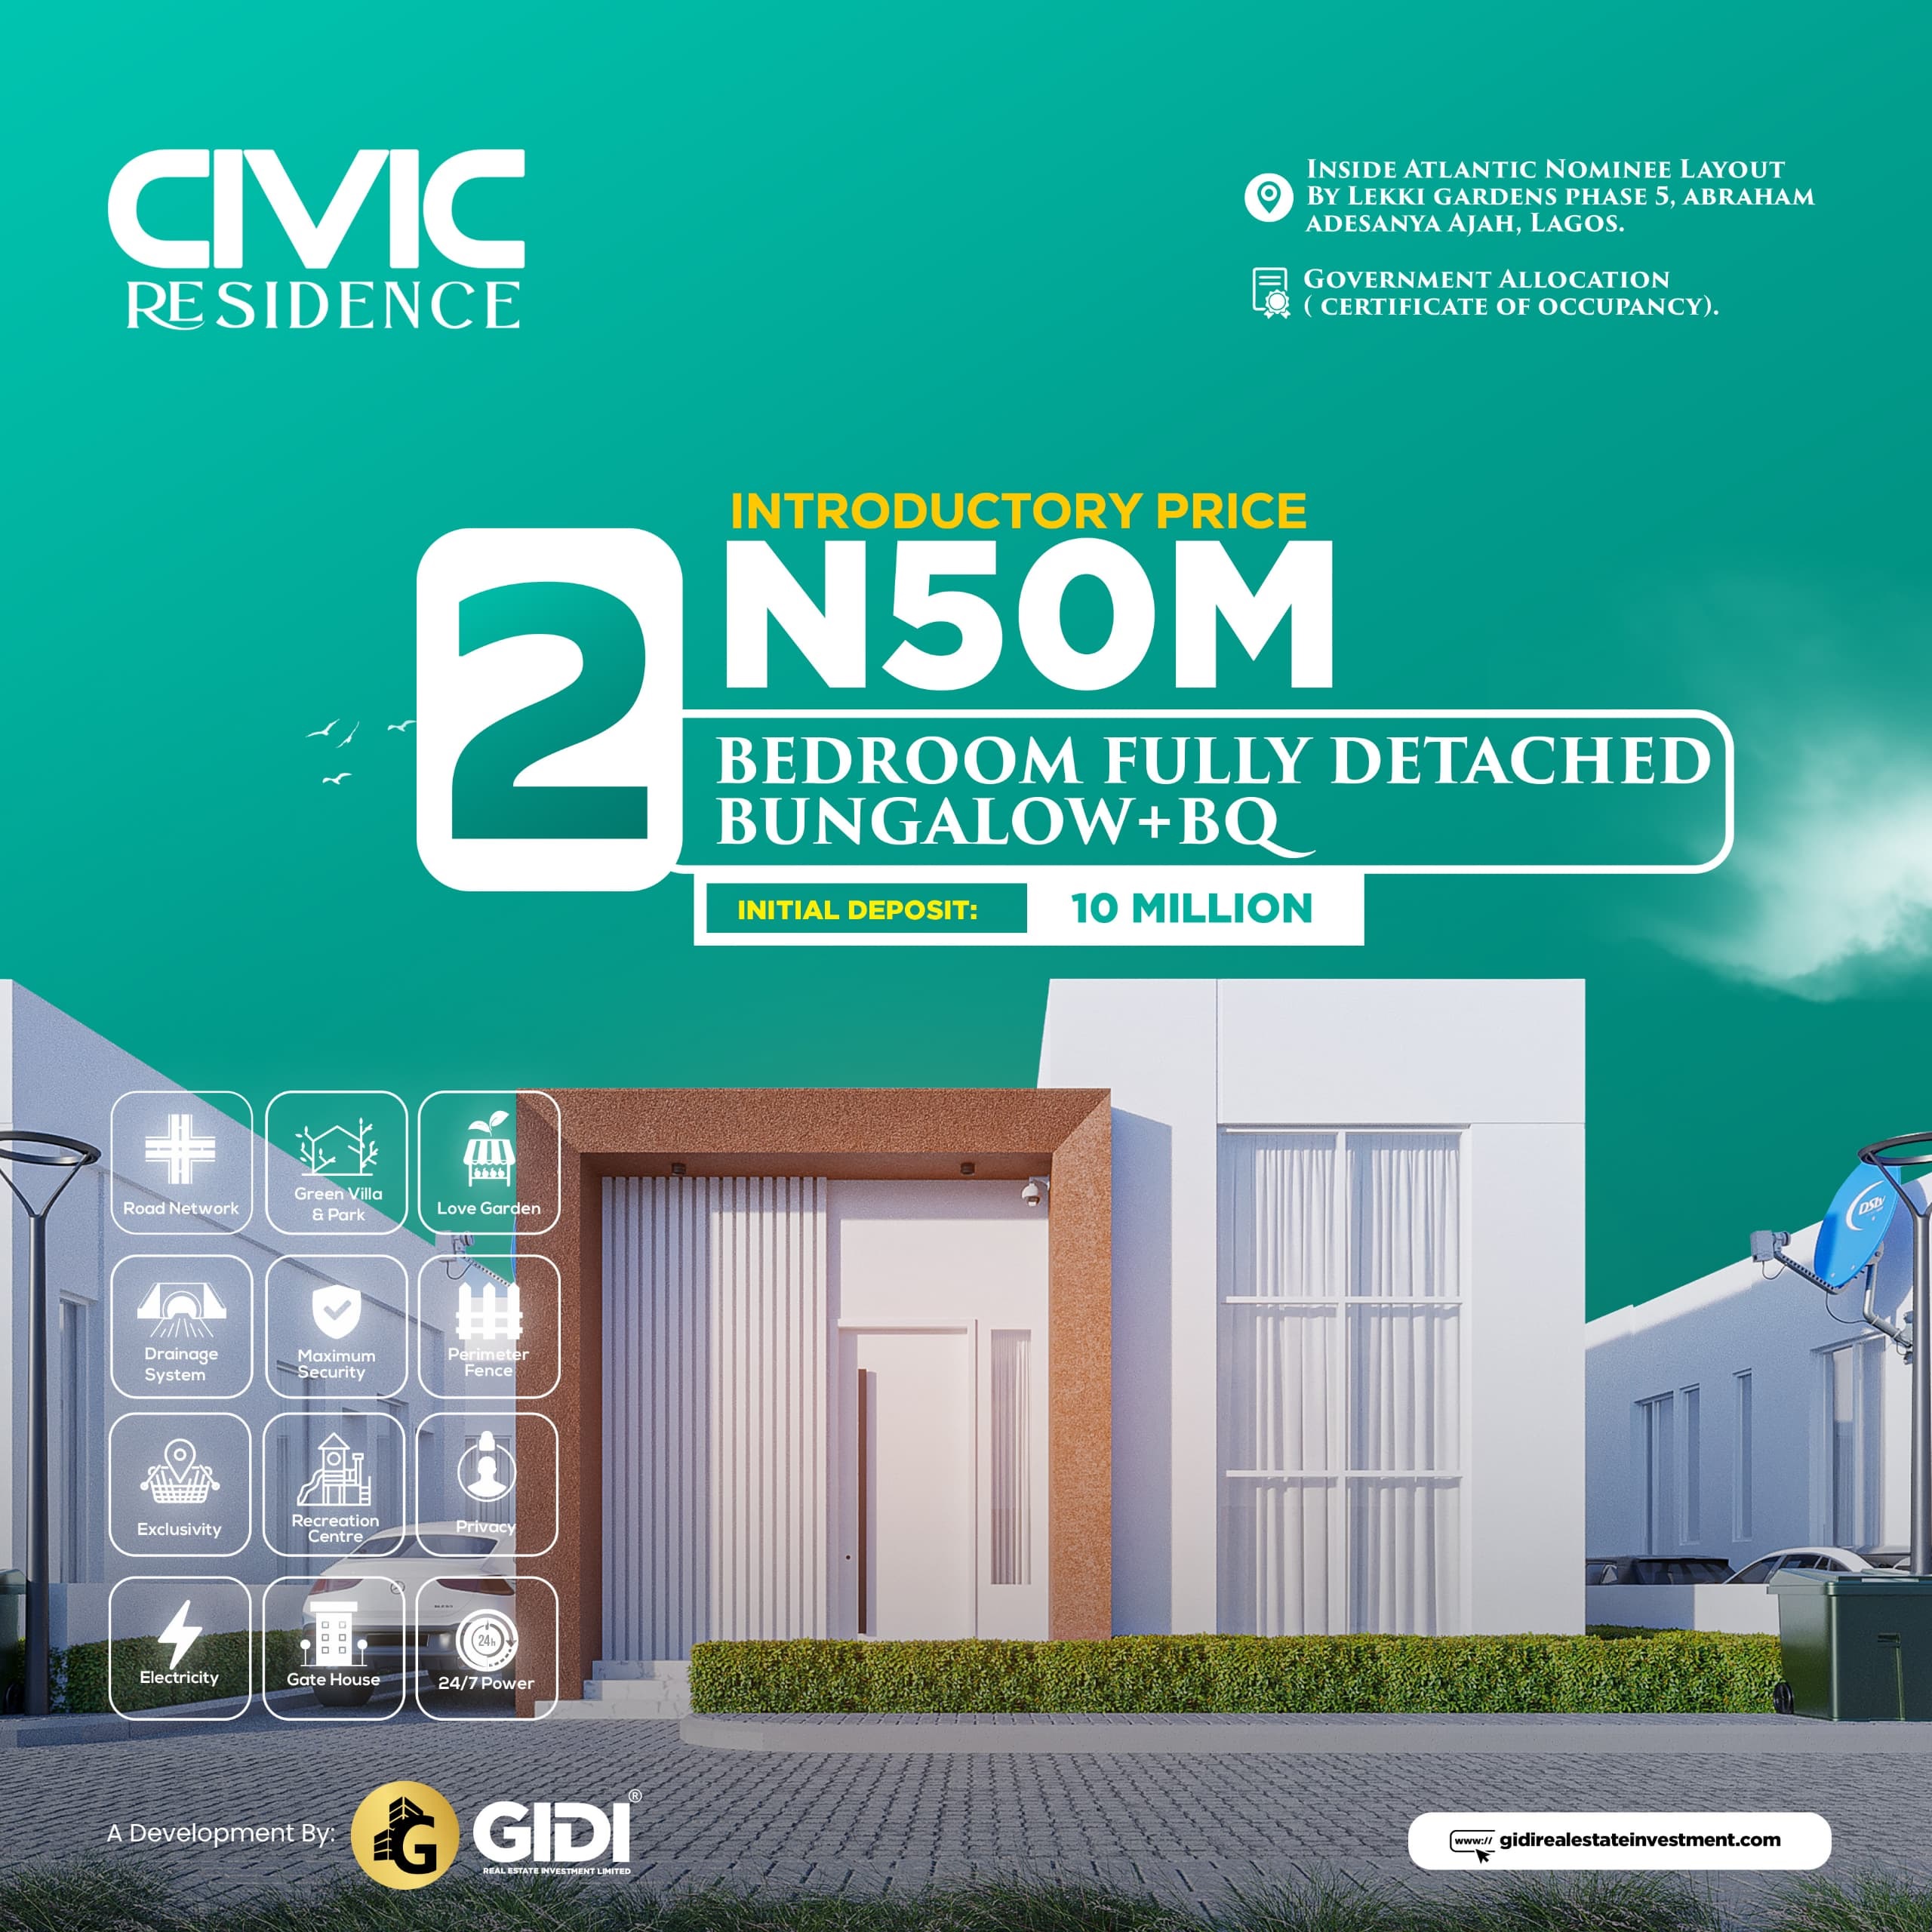 Civic Residence is a unique development of premium site and service plots, 2 bedroom detached bungalows with bq, 3 bedroom detached bungalows